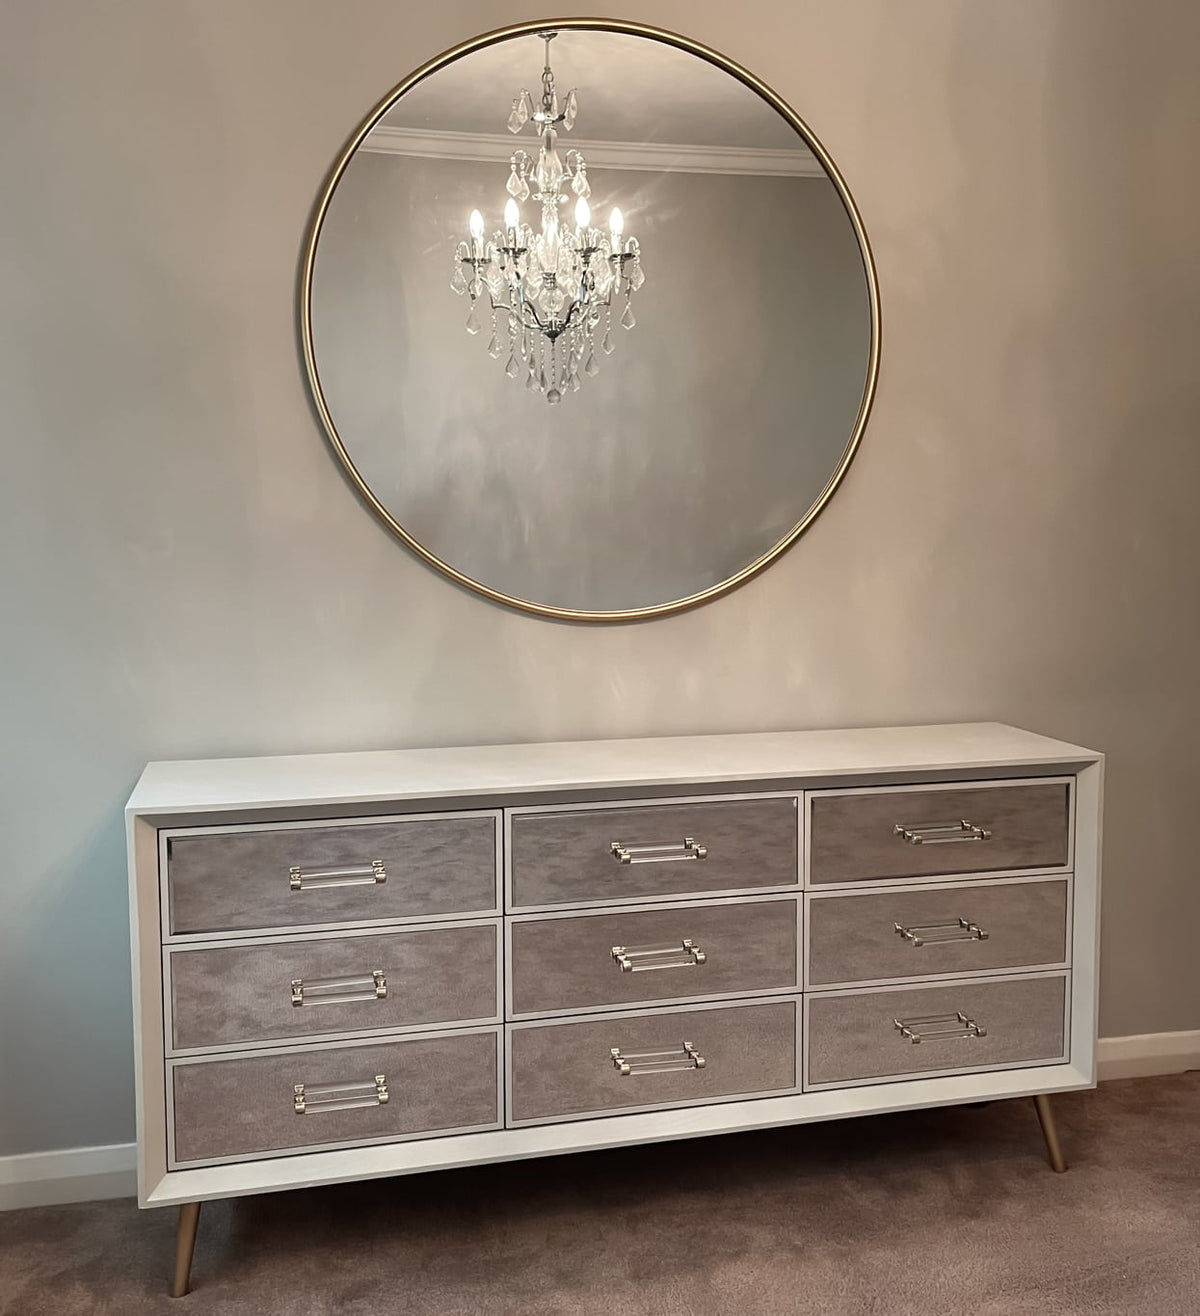 Carnaby Mirrored Chest of Drawers, white, gold